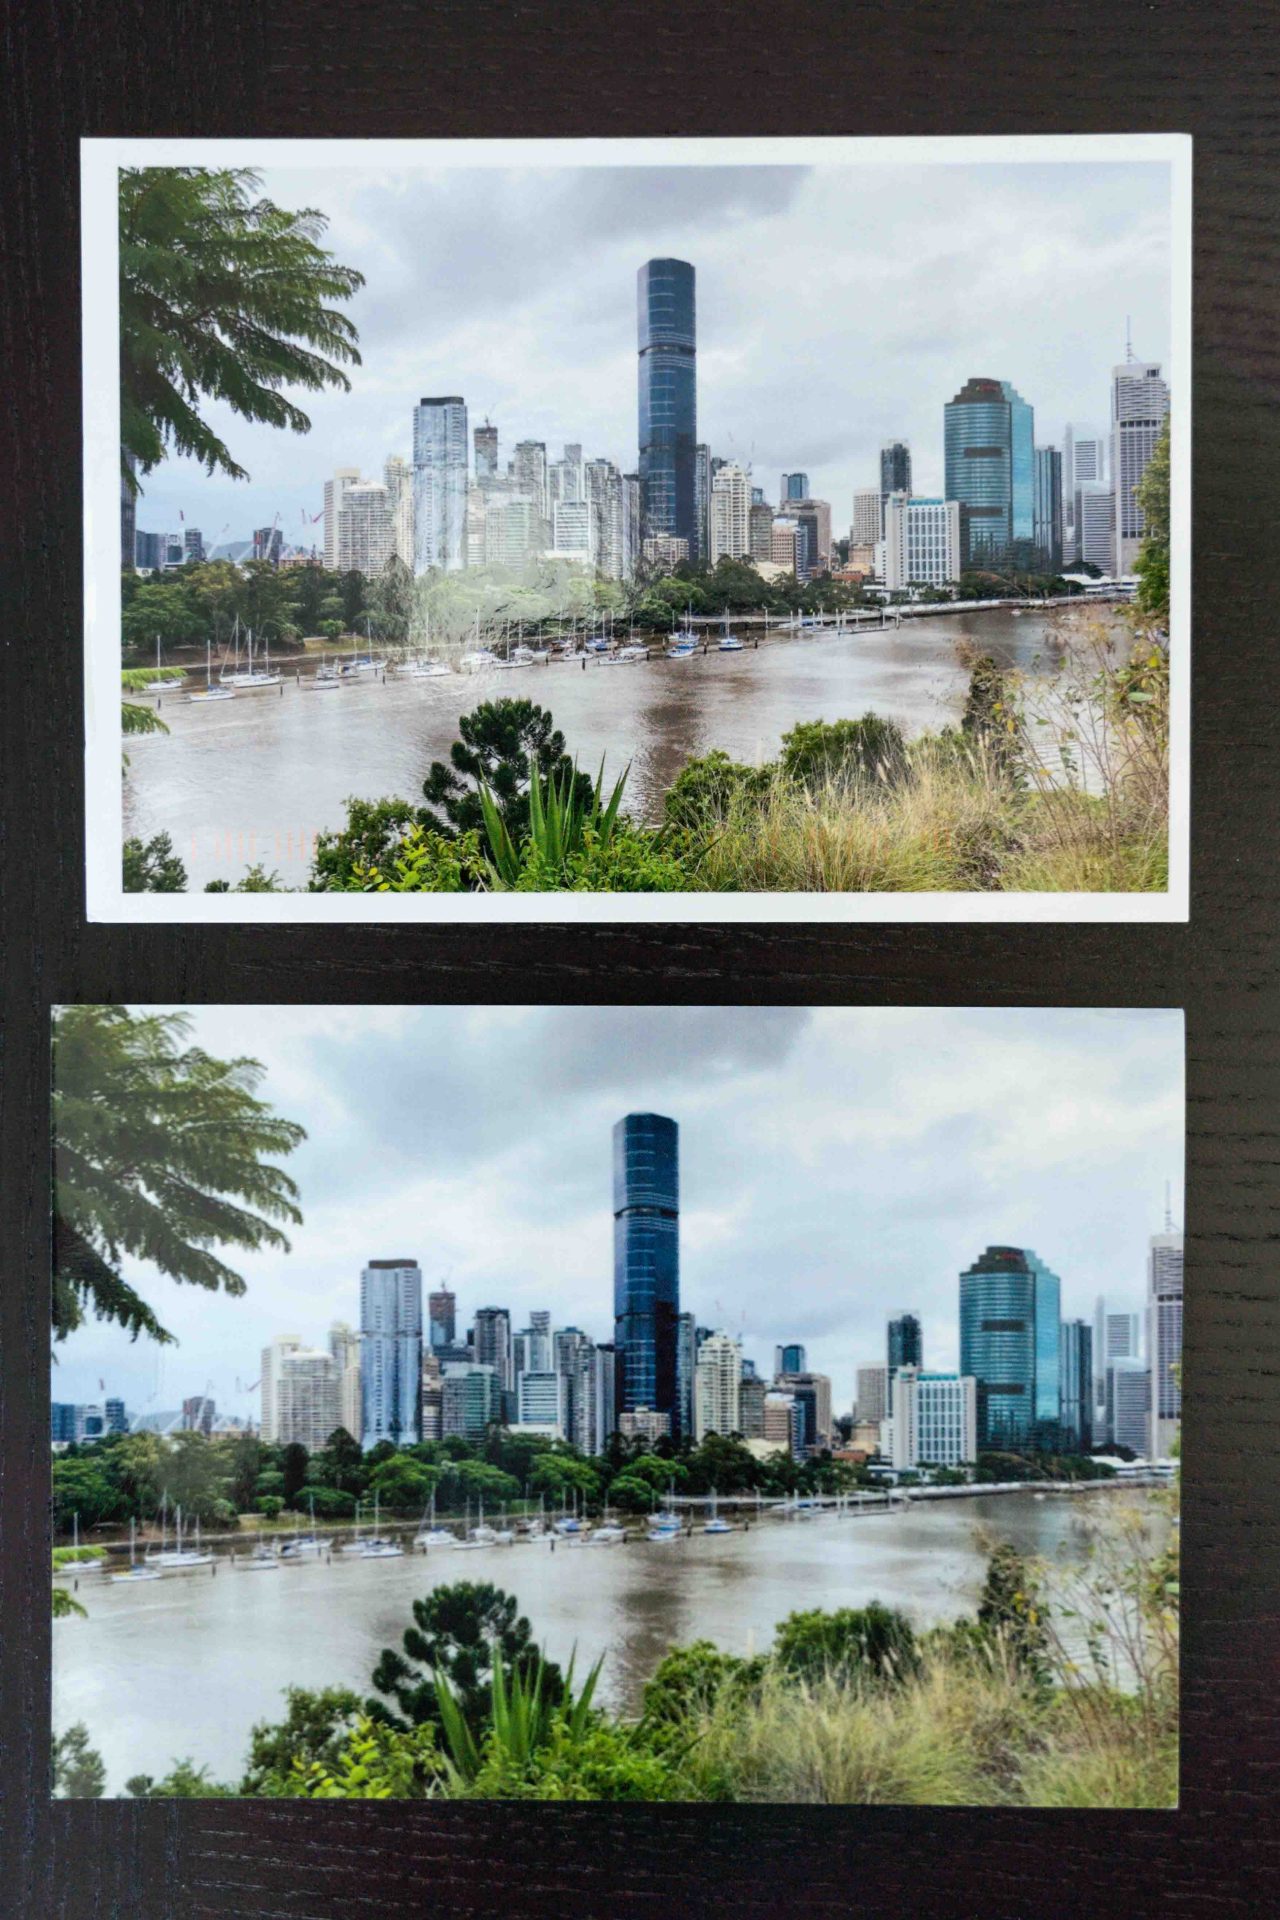 Postcards side by side for quality comparison